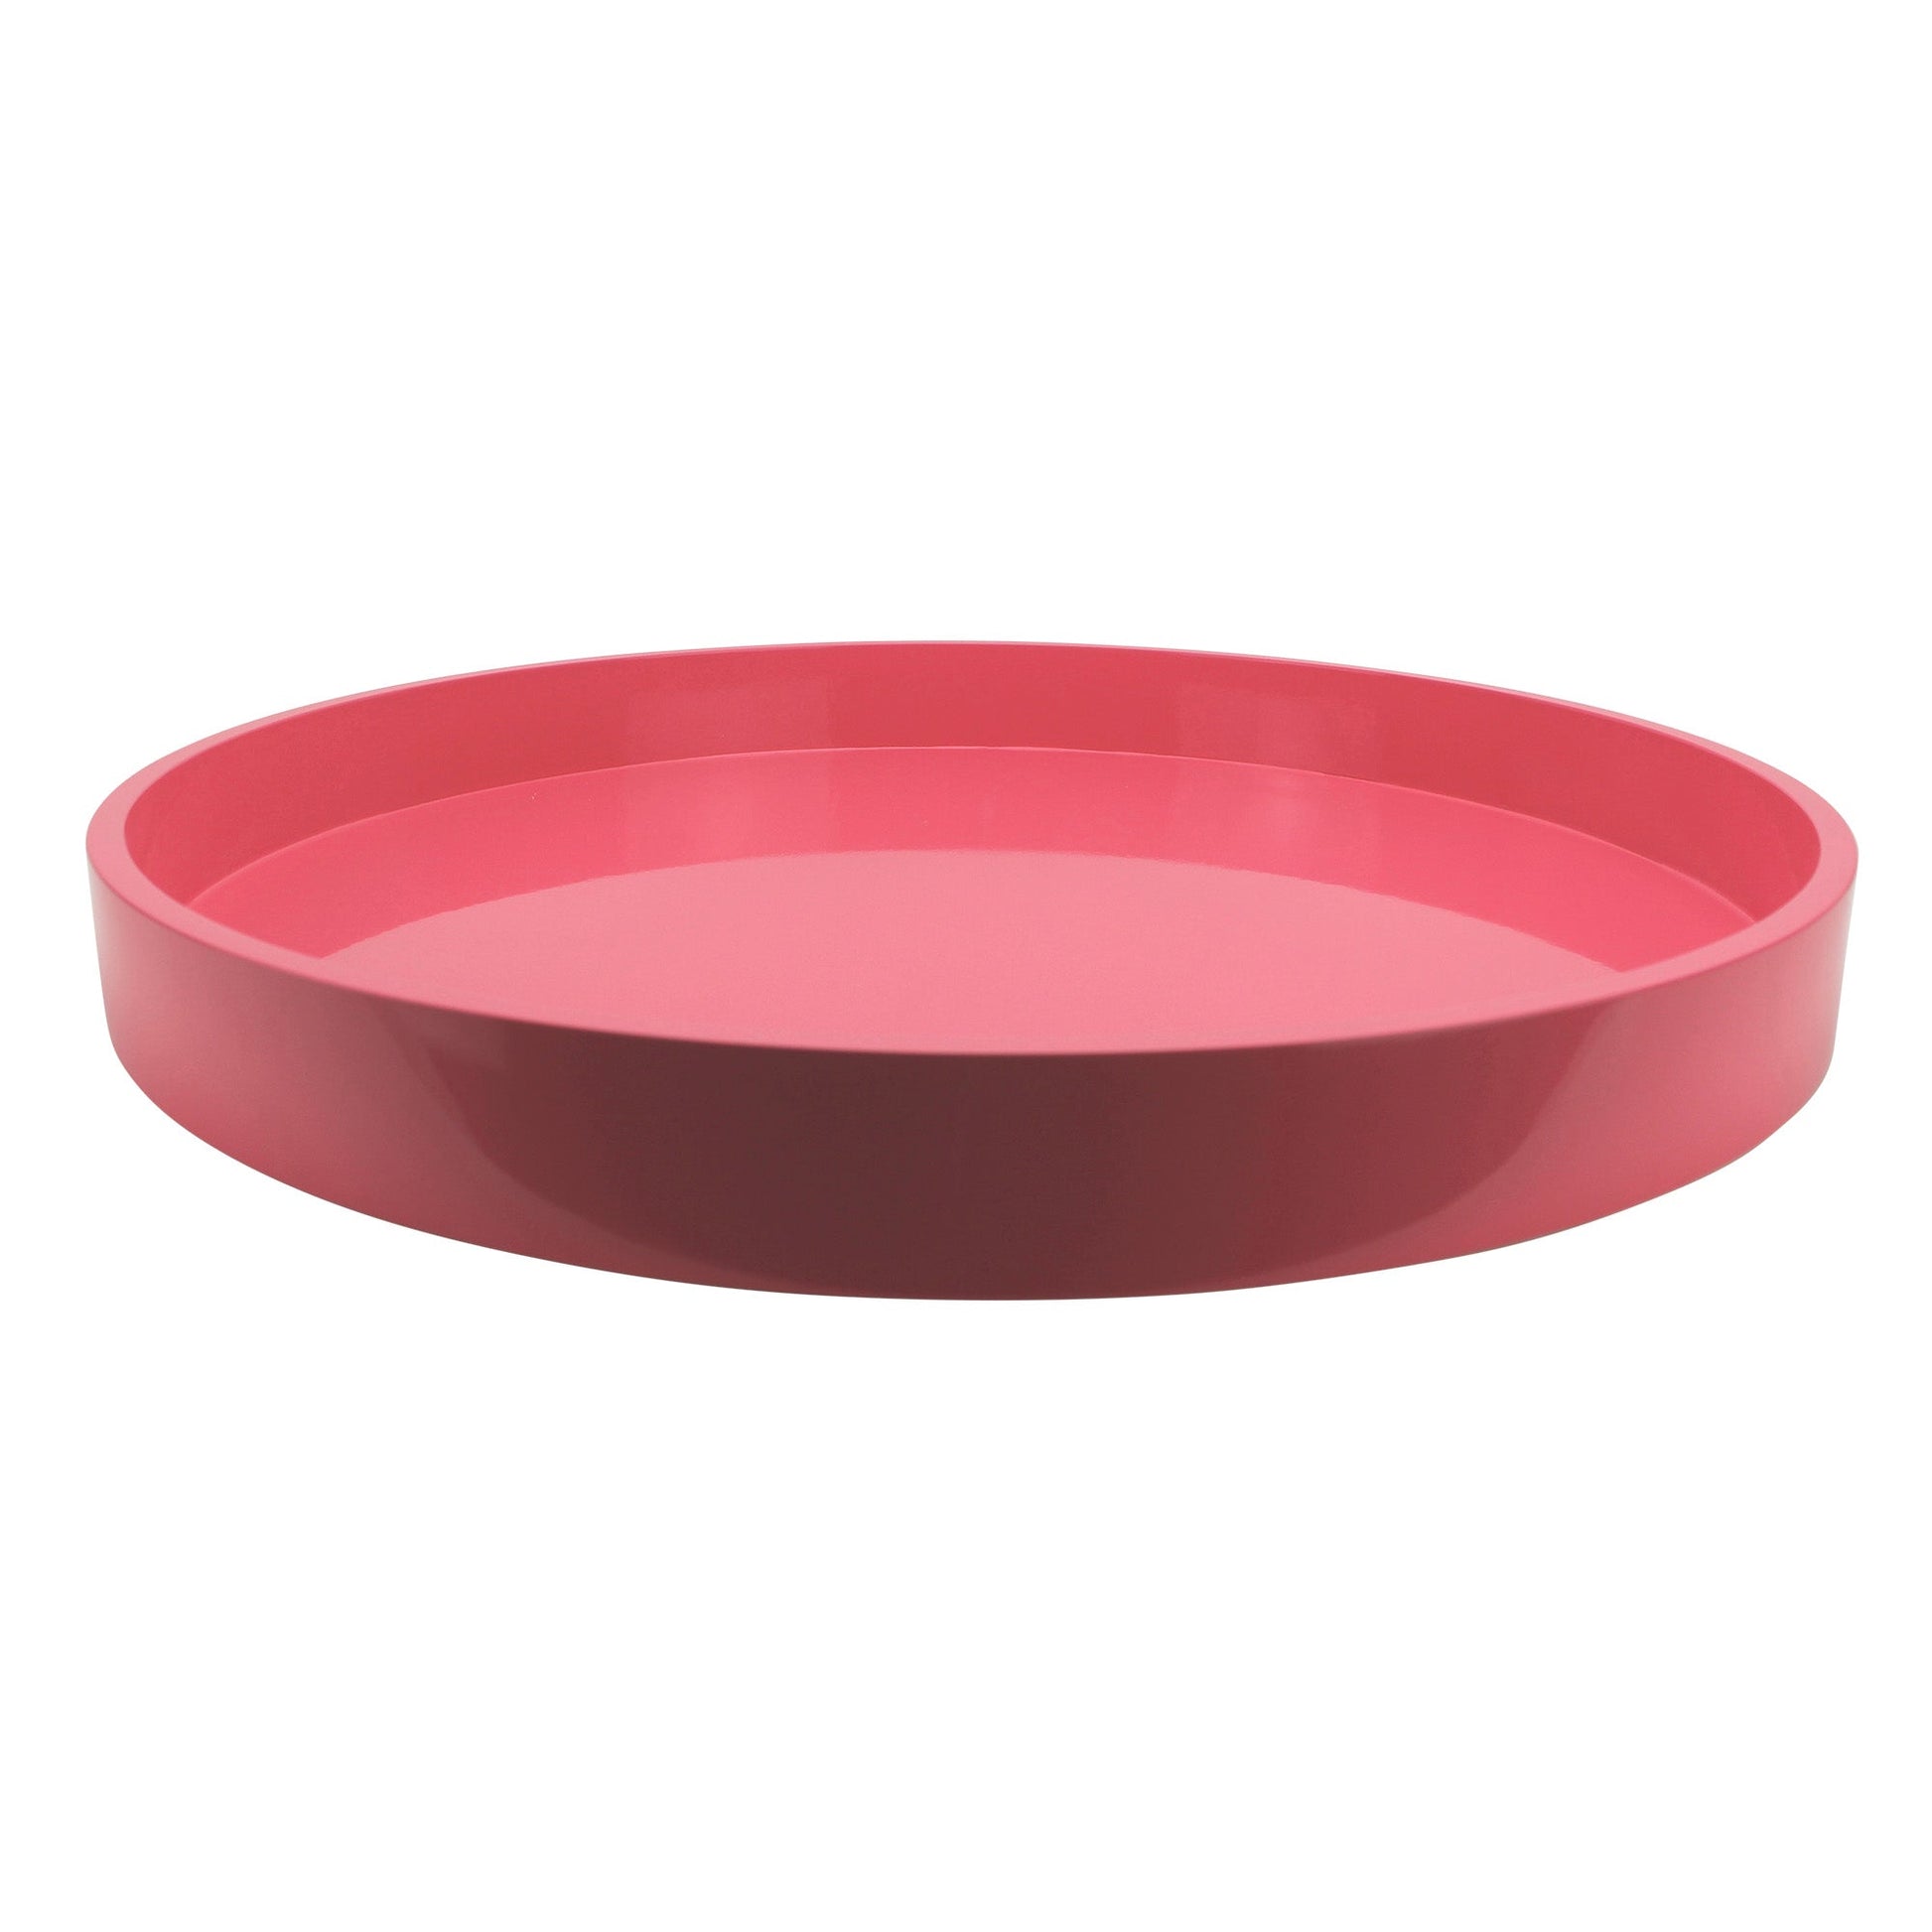 Watermelon Round Large Lacquered Tray - Addison Ross Ltd UK